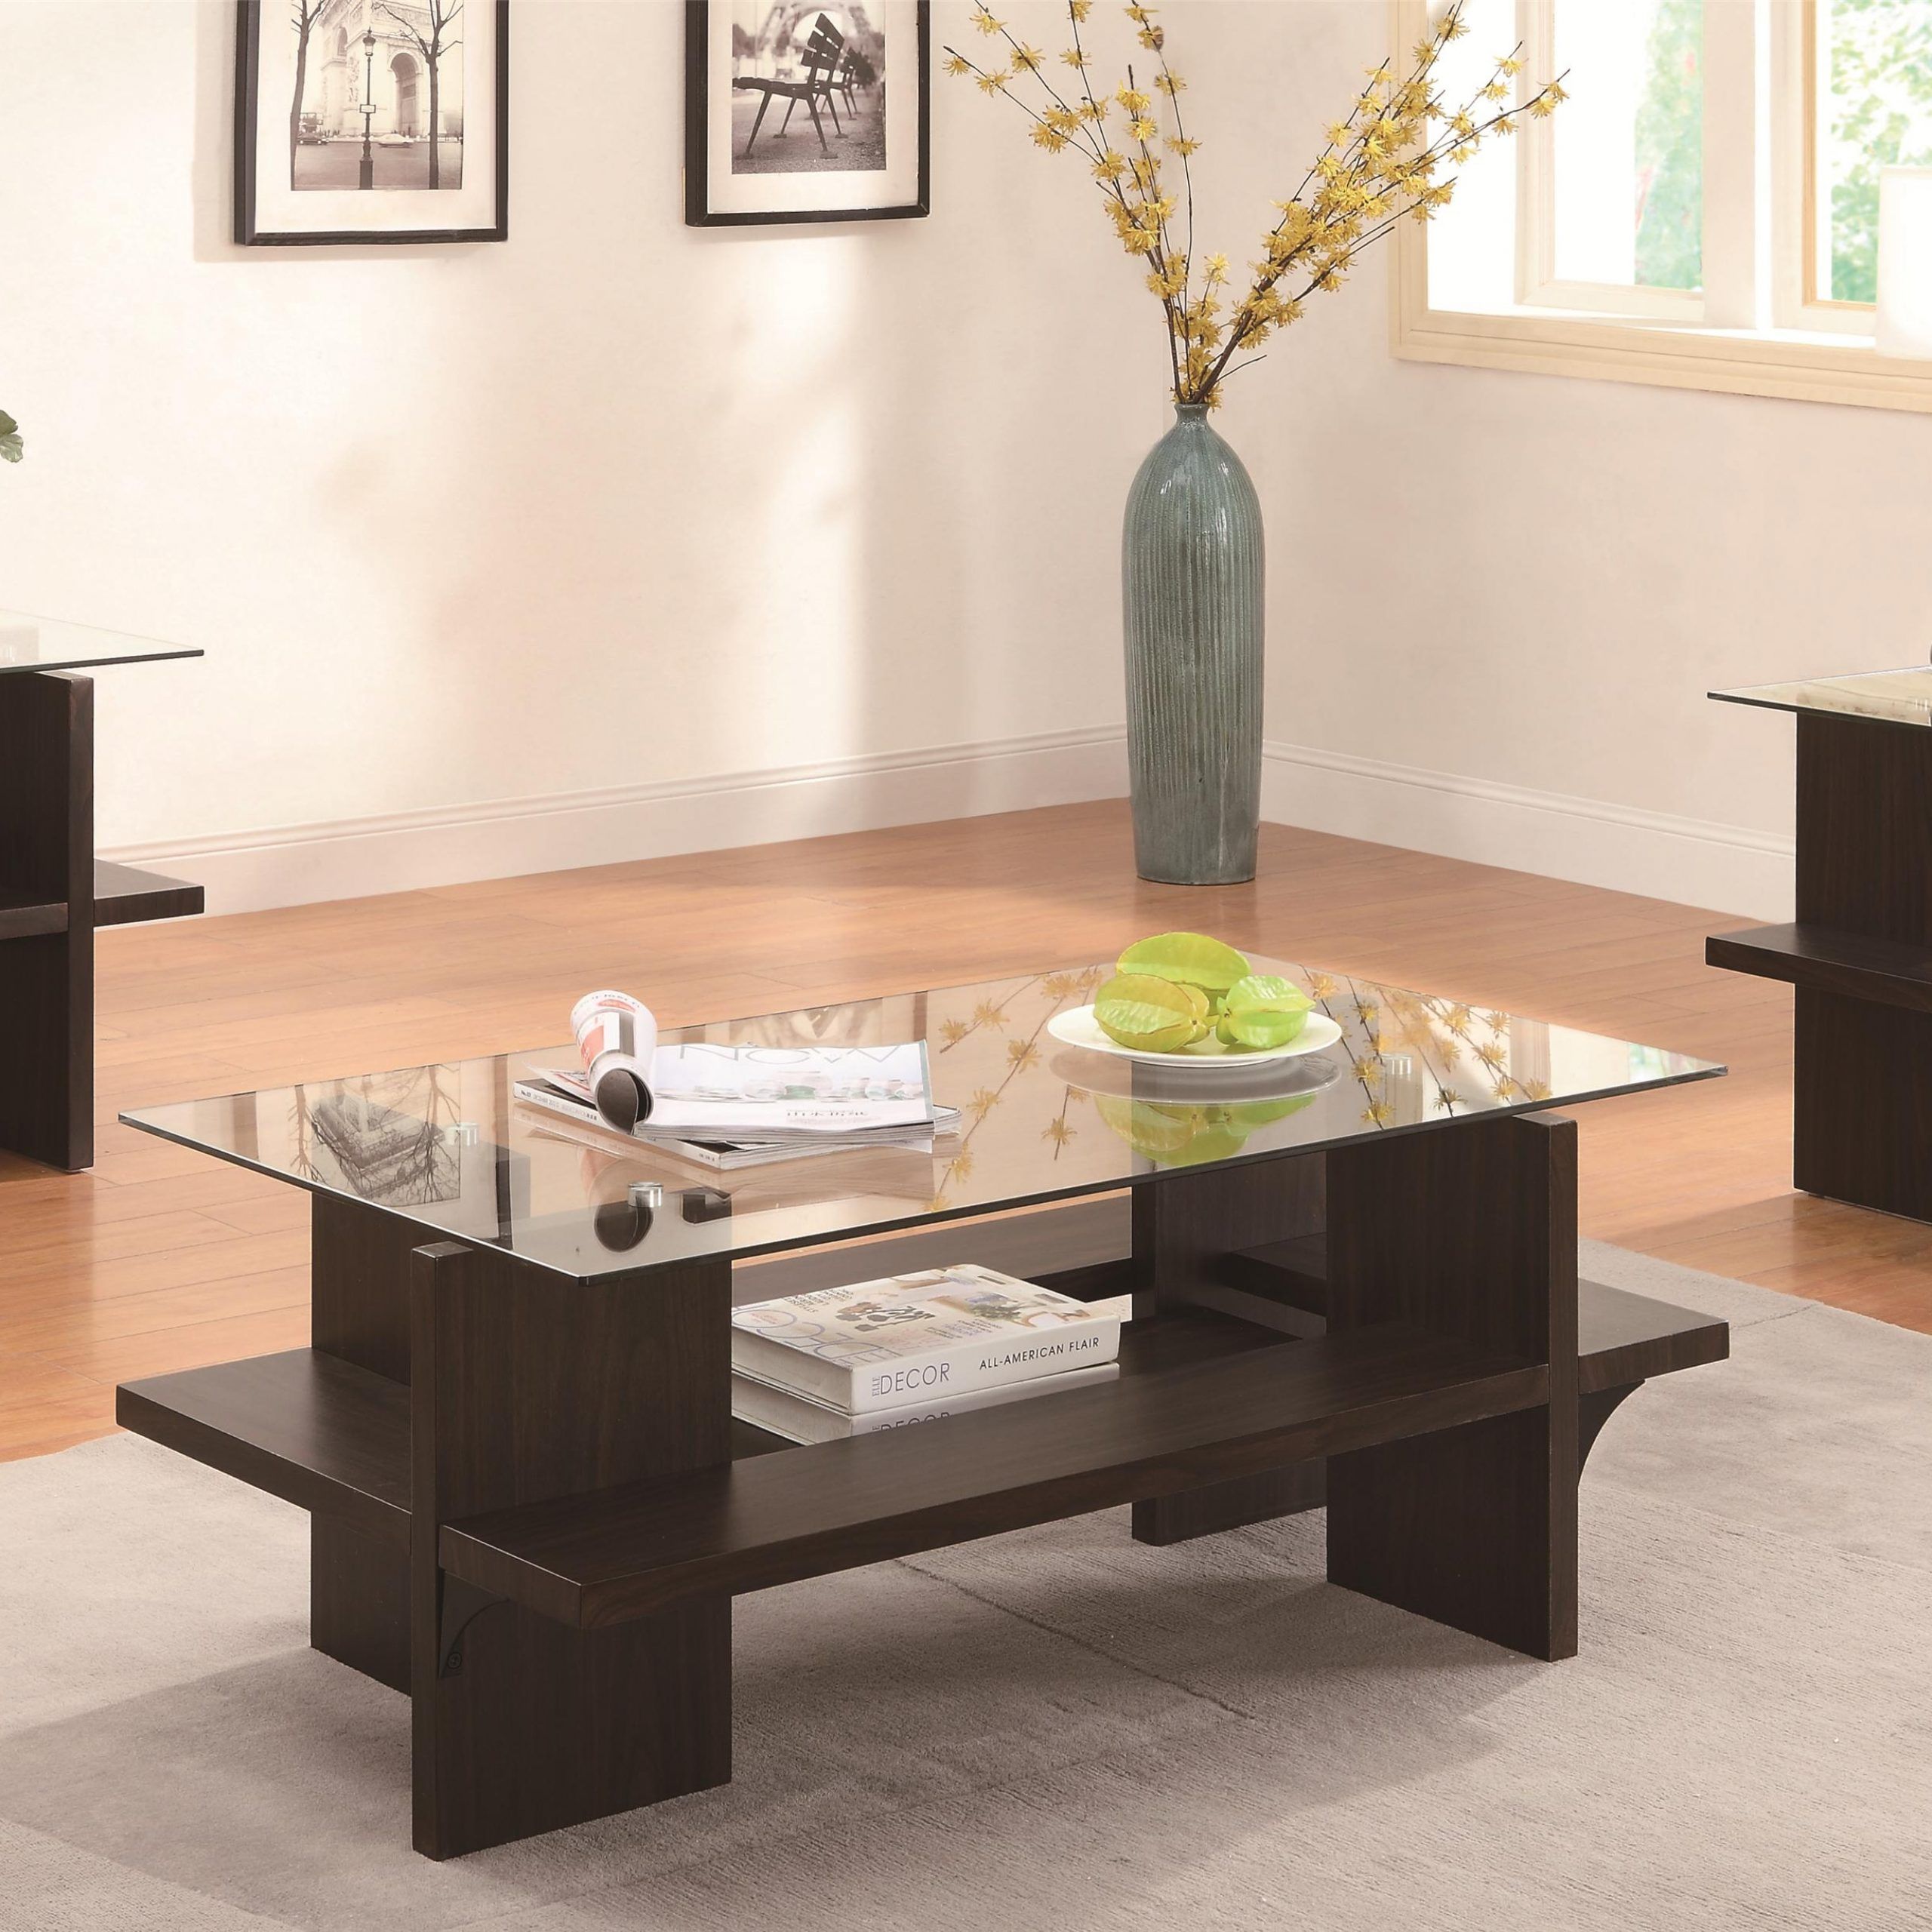 3 Piece Occasional Table Sets 3 Piece Contemporary Occasional Table Set  With Glass Tops And Storage Shelves | Quality Furniture At Affordable  Prices In Philadelphia Main Line Pa Intended For Glass Coffee Tables With Storage Shelf (Gallery 20 of 20)